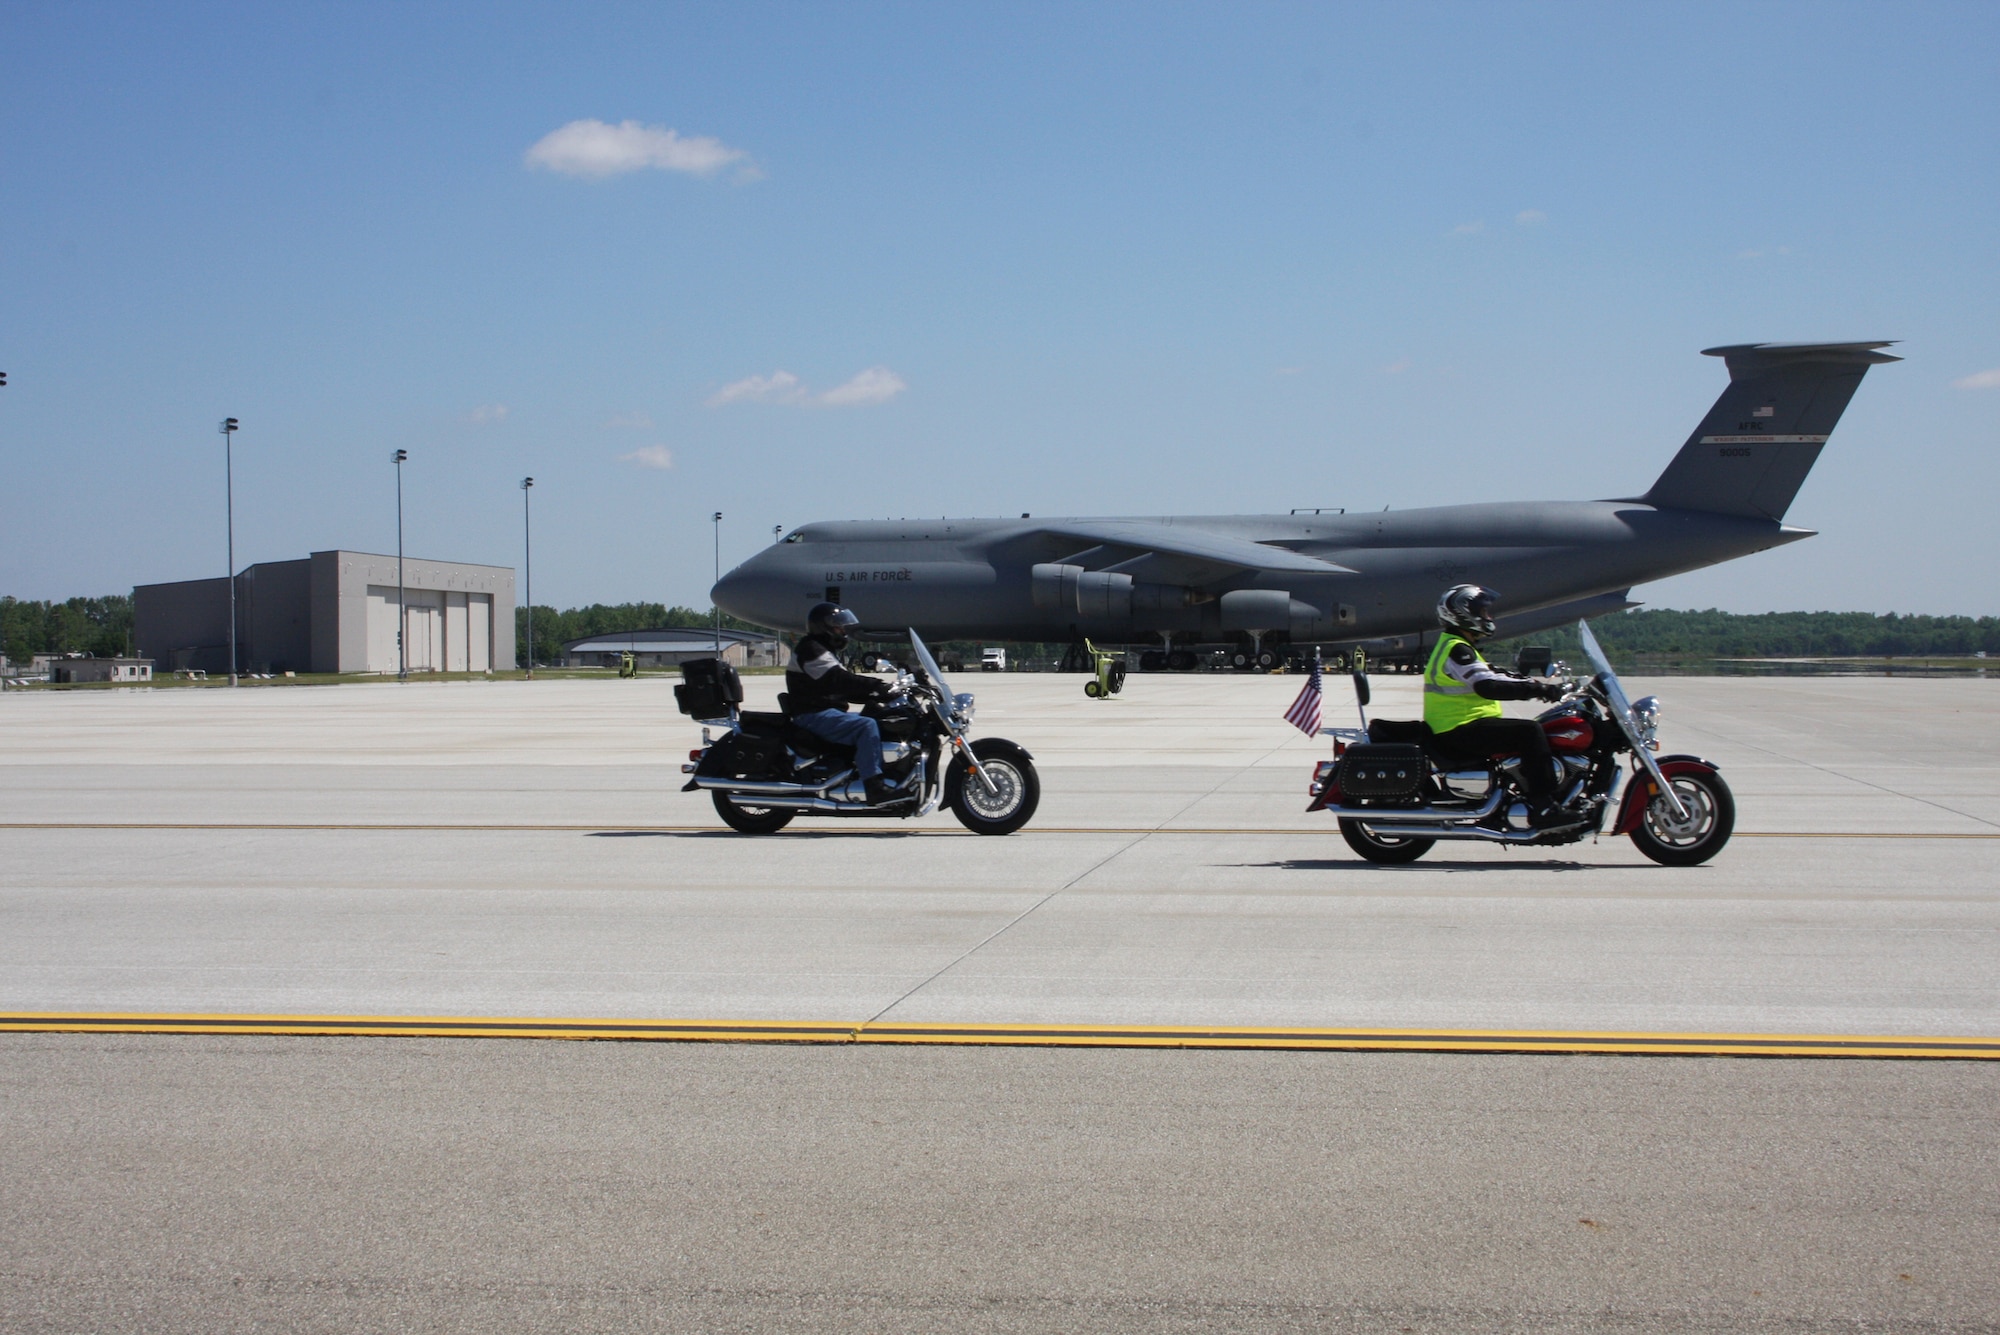 WRIGHT-PATTERSON AIR FORCE BASE, Ohio - The C-5 Galaxy provided the perfect background for a motorcycle ride to more than 240 motorcycle enthusiasts, including 10 riders from the 445th Airlift Wing, participating in the 5th Annual Spring Motorcycle Event May 29. 